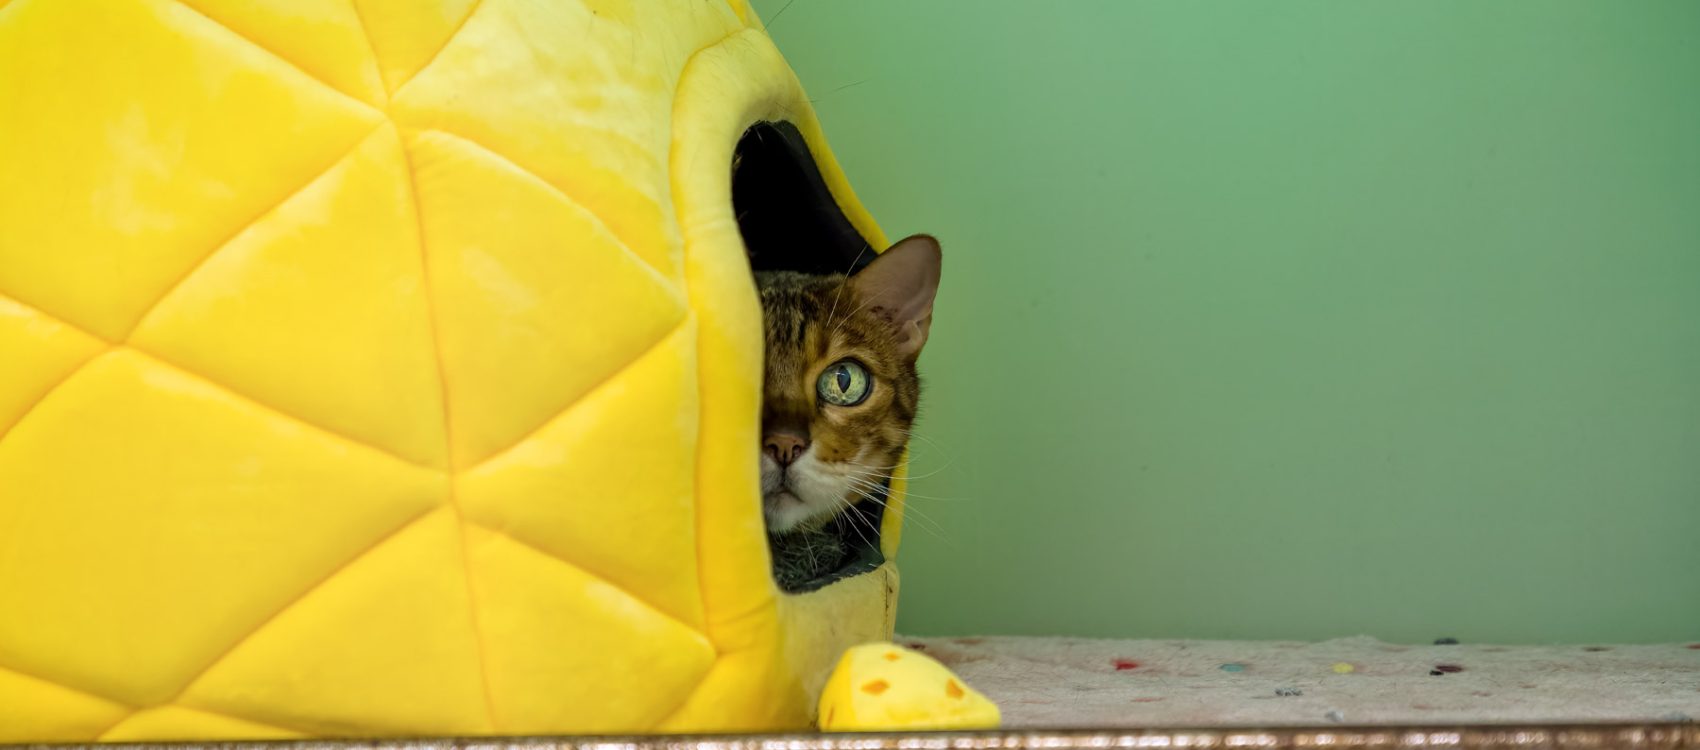 Cat in a Pineapple house!